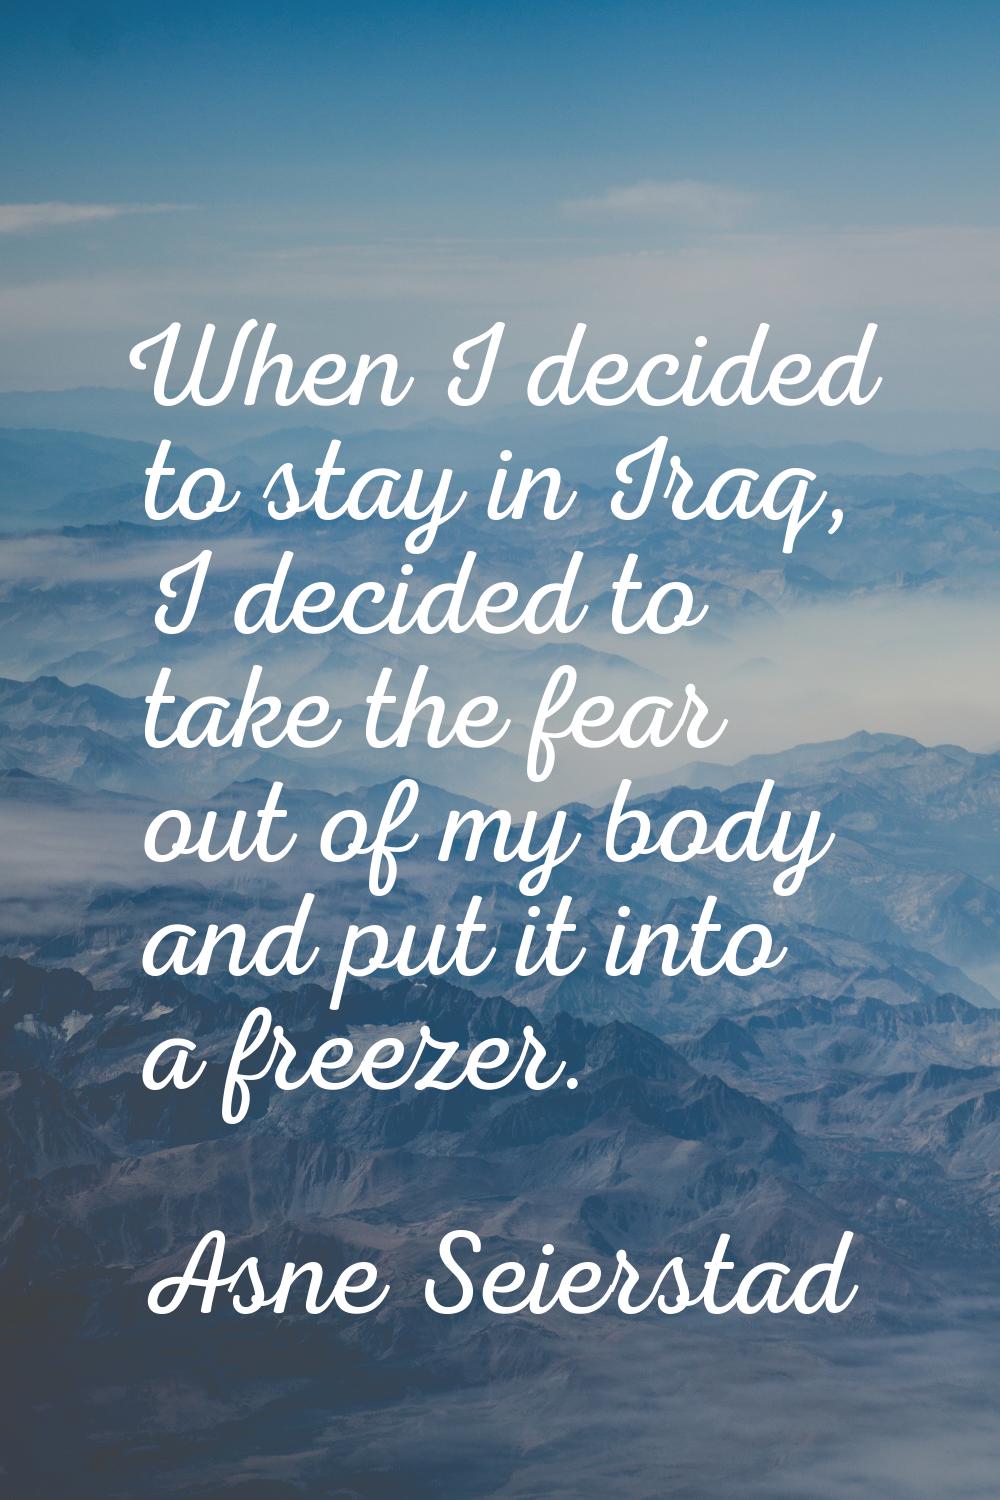 When I decided to stay in Iraq, I decided to take the fear out of my body and put it into a freezer